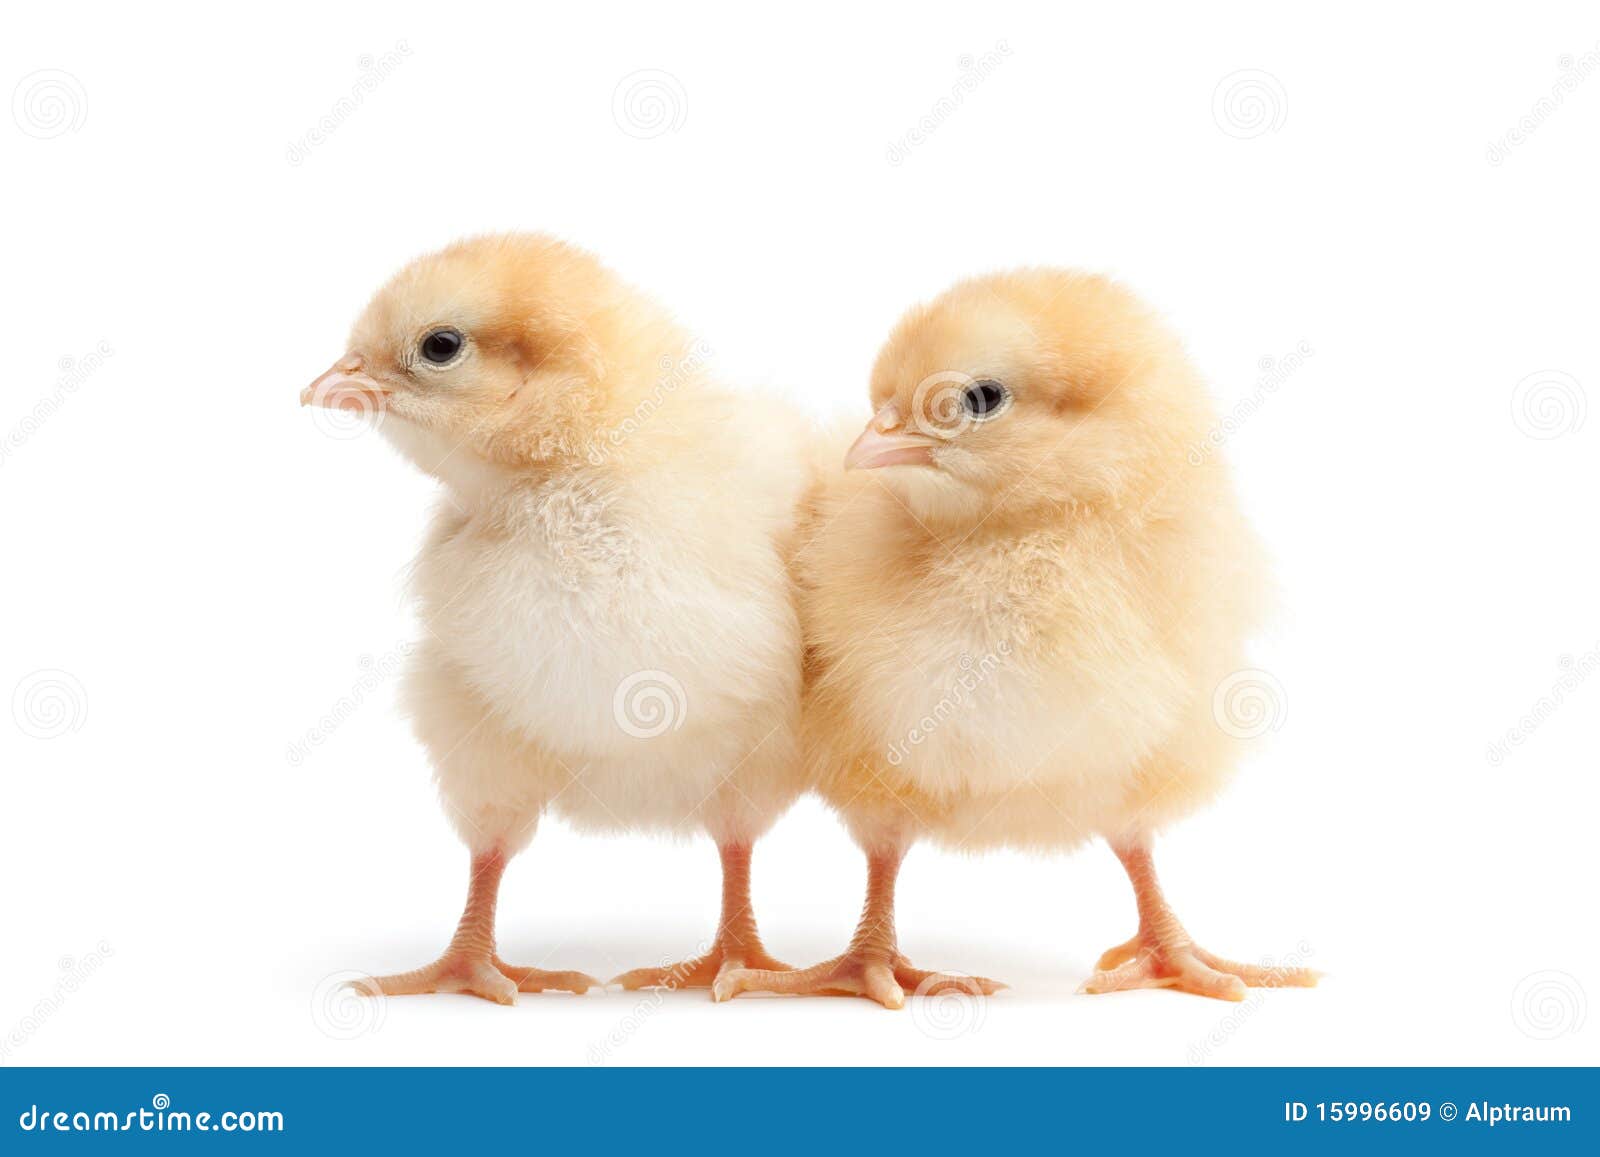 two baby chicks  on white